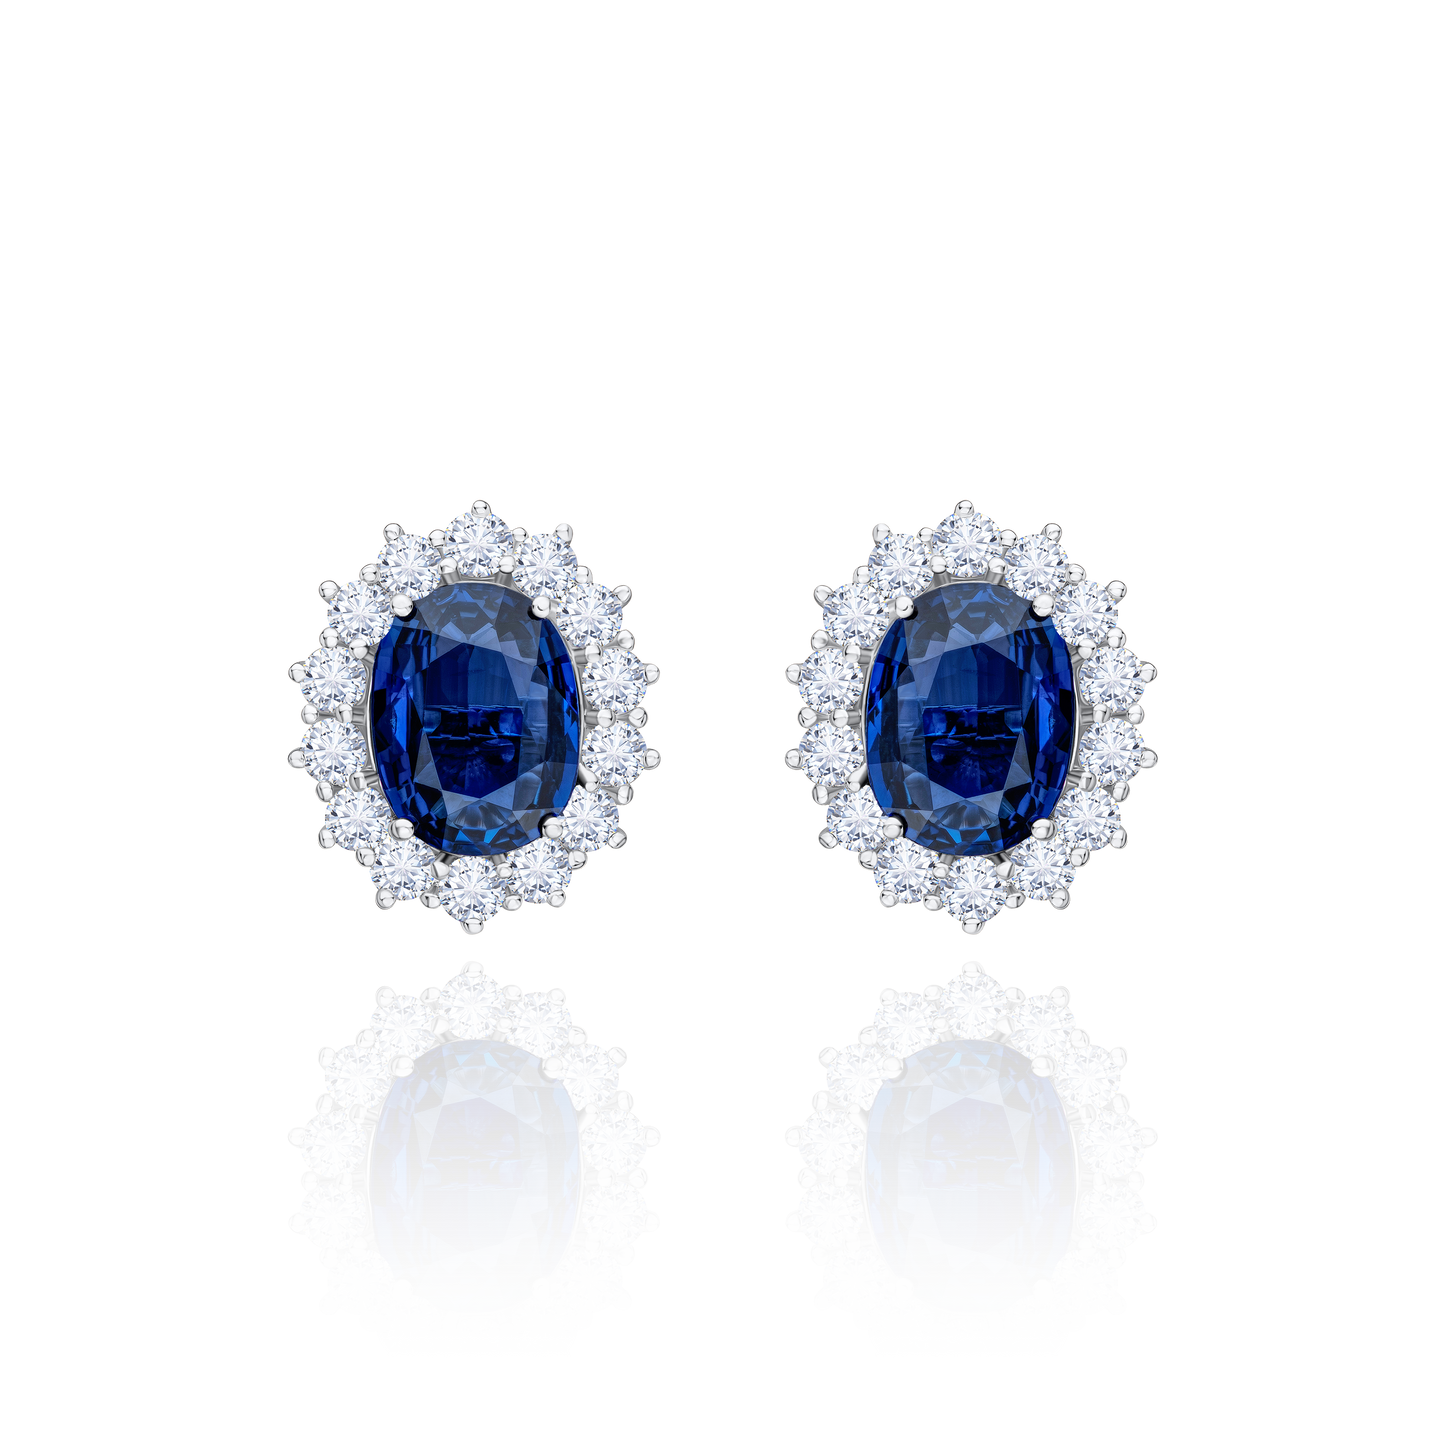 8.42cts Sapphire and Diamond Cluster Earrings